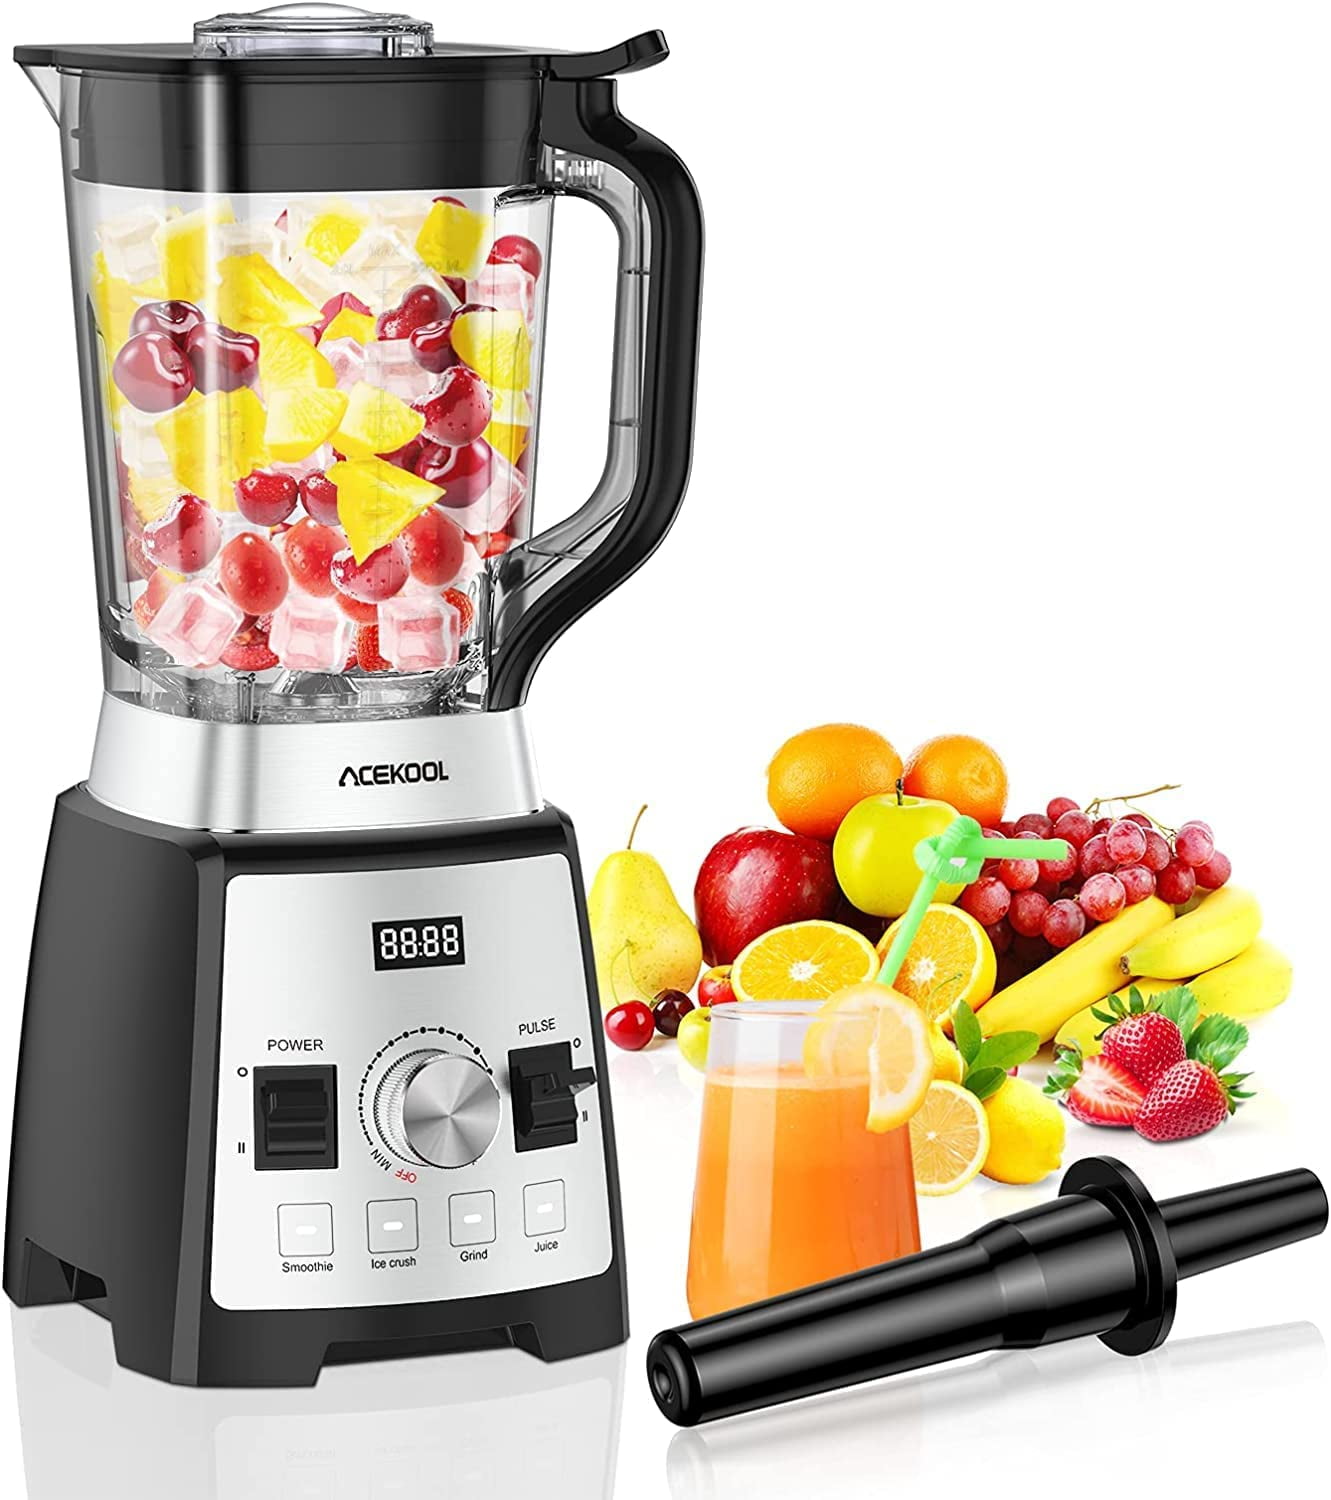 SNKOURIN Timed Smoothie Machine, Countertop Blender,Blender for kitchen  1500W High Power Home and Commercial Blender, Smoothie Maker 2200ml for